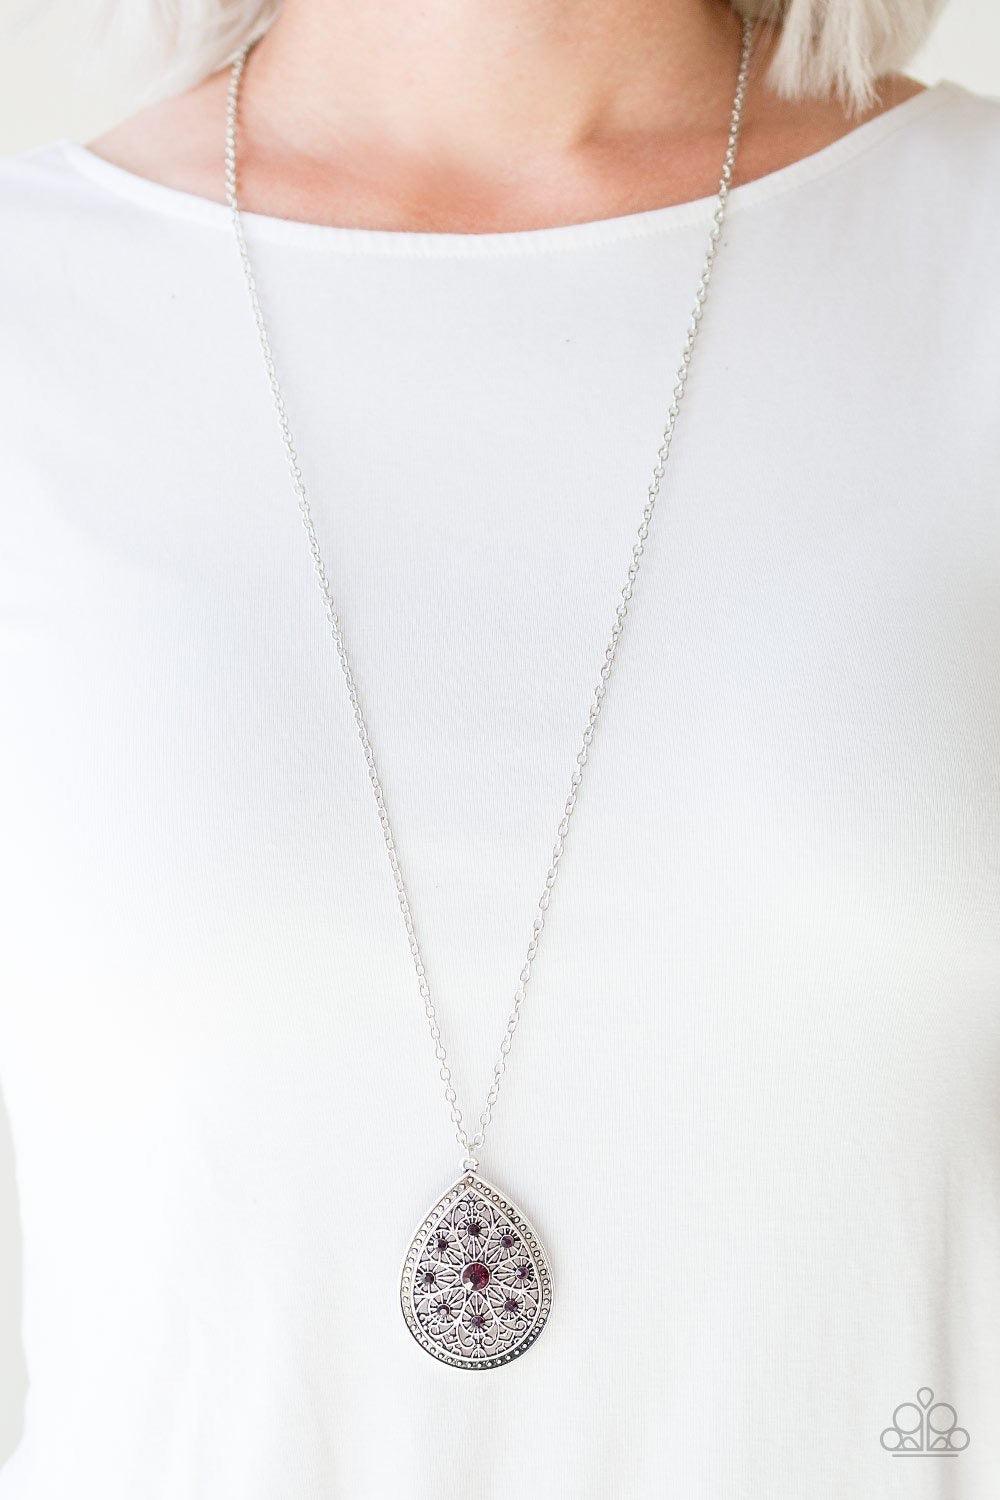 Paparazzi Accessories I Am Queen - Purple A dramatic teardrop pendant swings from the bottom of an elongated silver chain, elegantly slimming the torso. Glittery purple rhinestones are sprinkled along the pendant as silver filigree dances across the cente